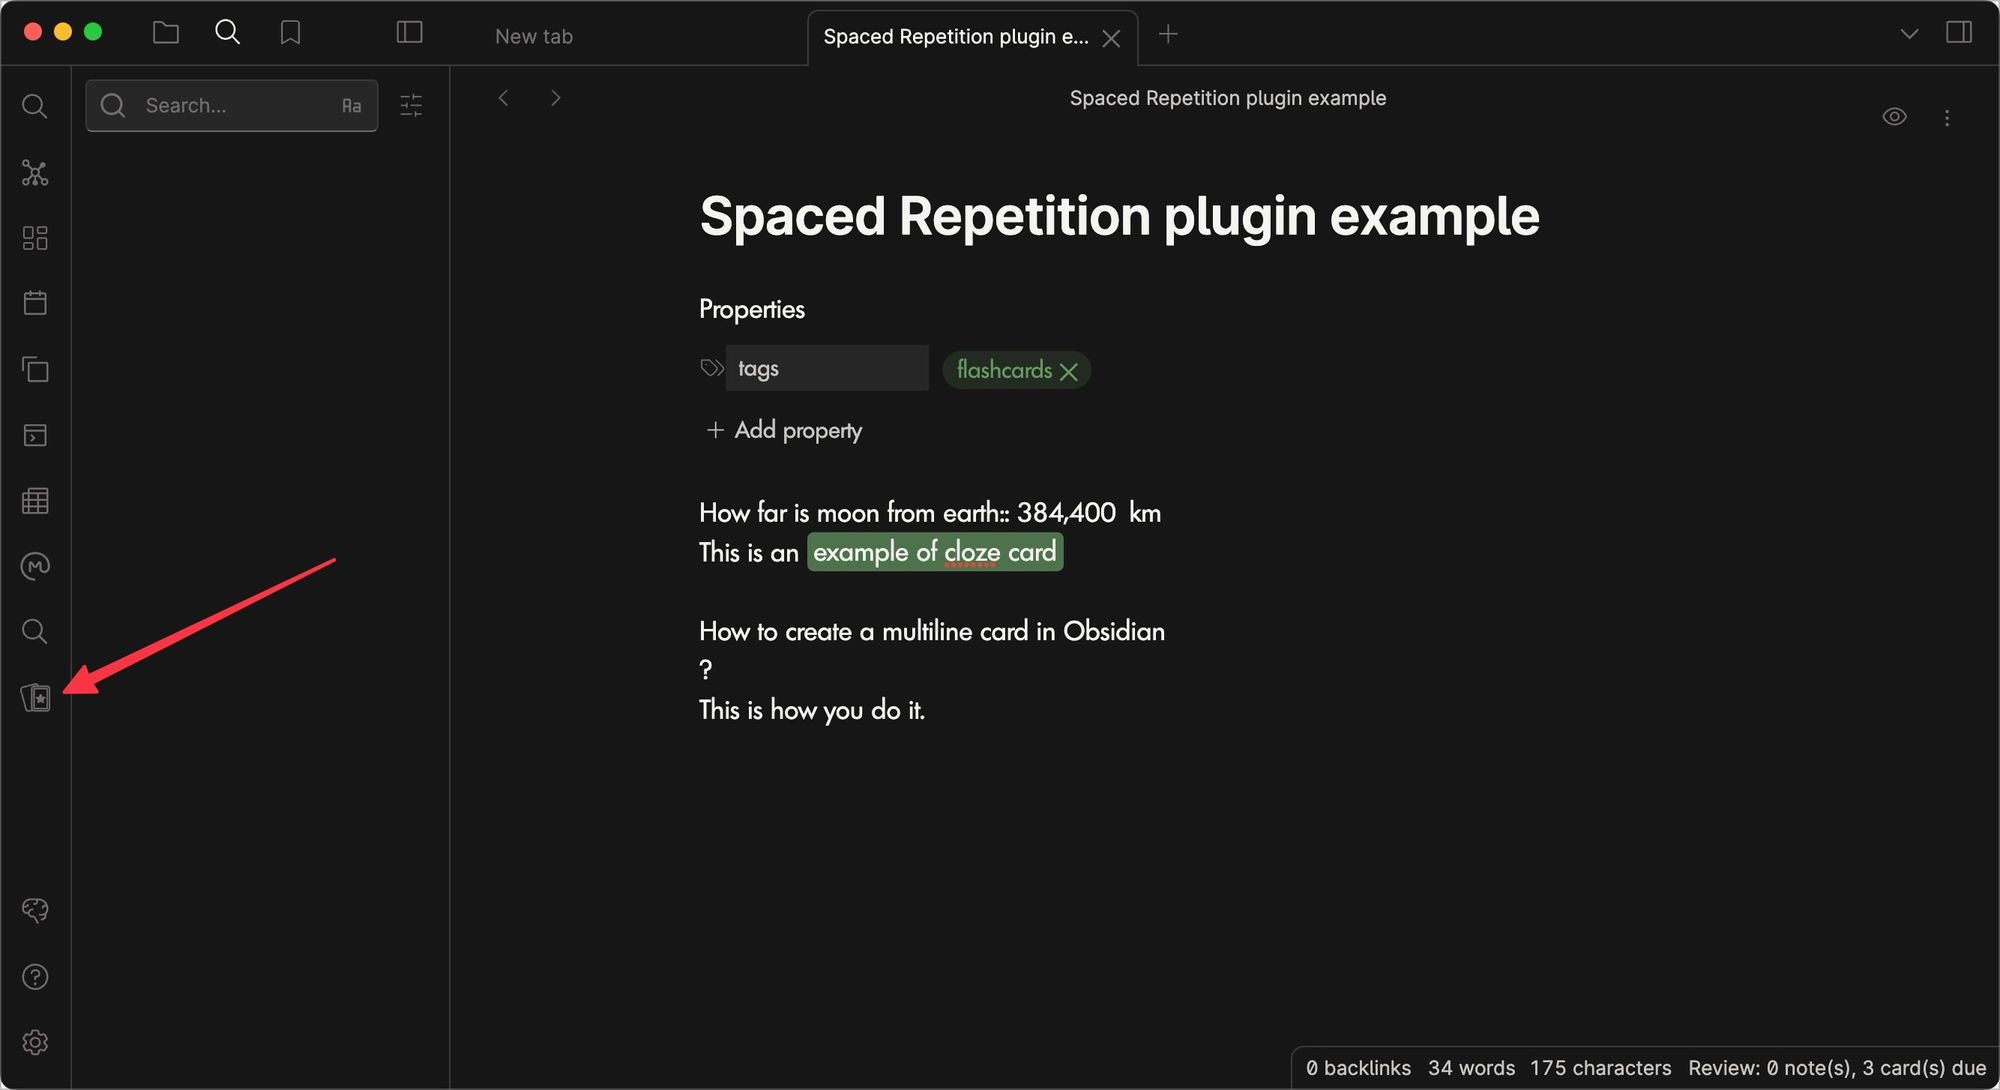 Spaced repetition plugin cards